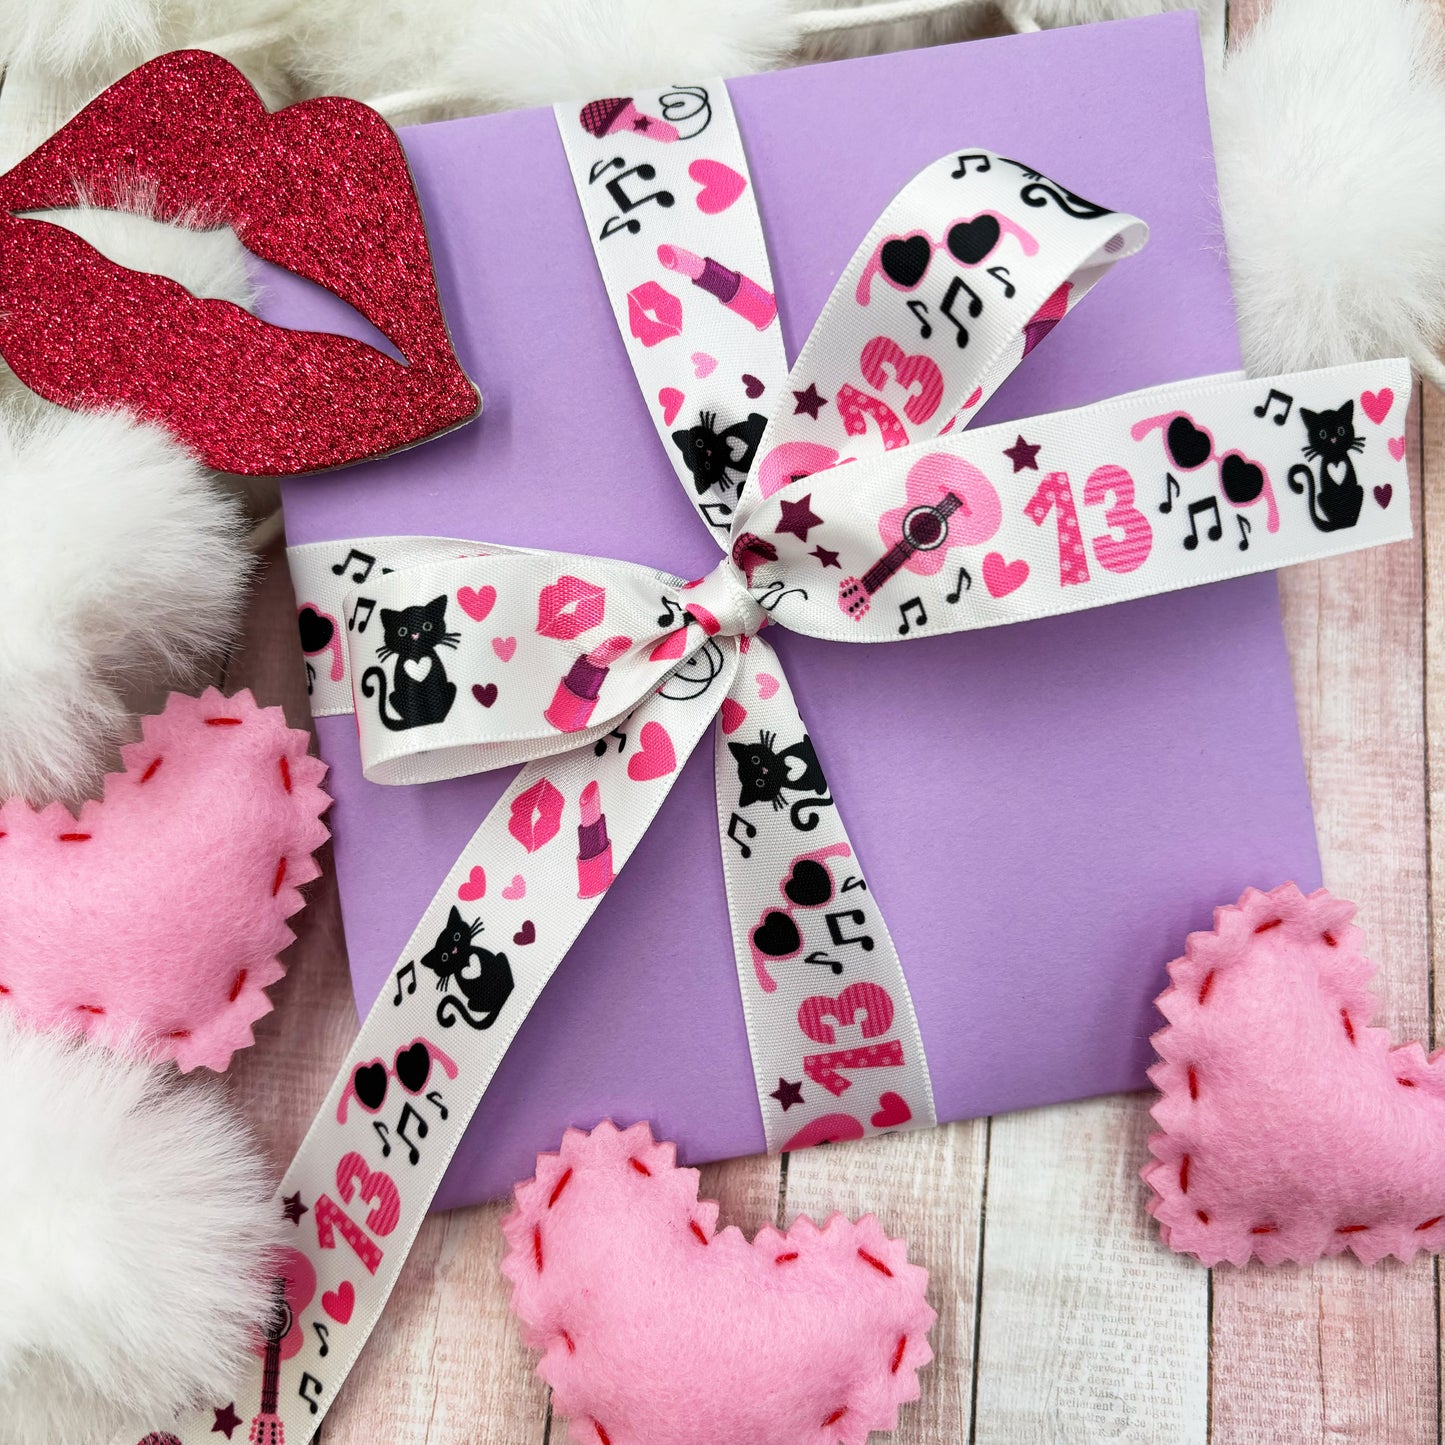 Pop Star ribbon with guitars, microphones, sunglasses, cats, in pink and black printed in 7/8" white satin